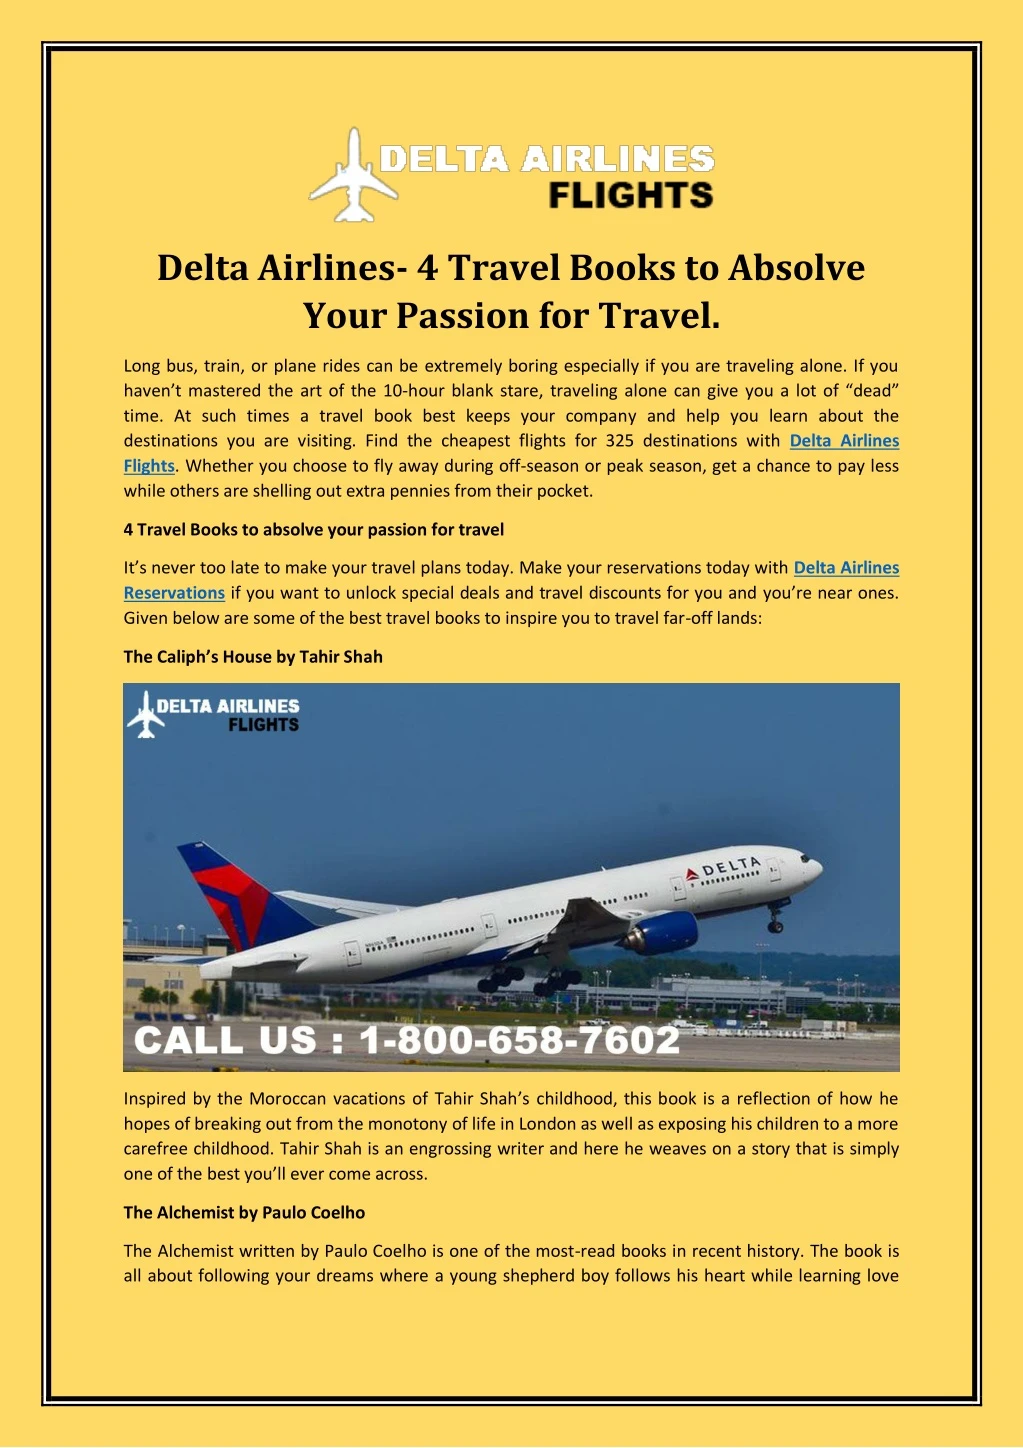 delta airlines 4 travel books to absolve your